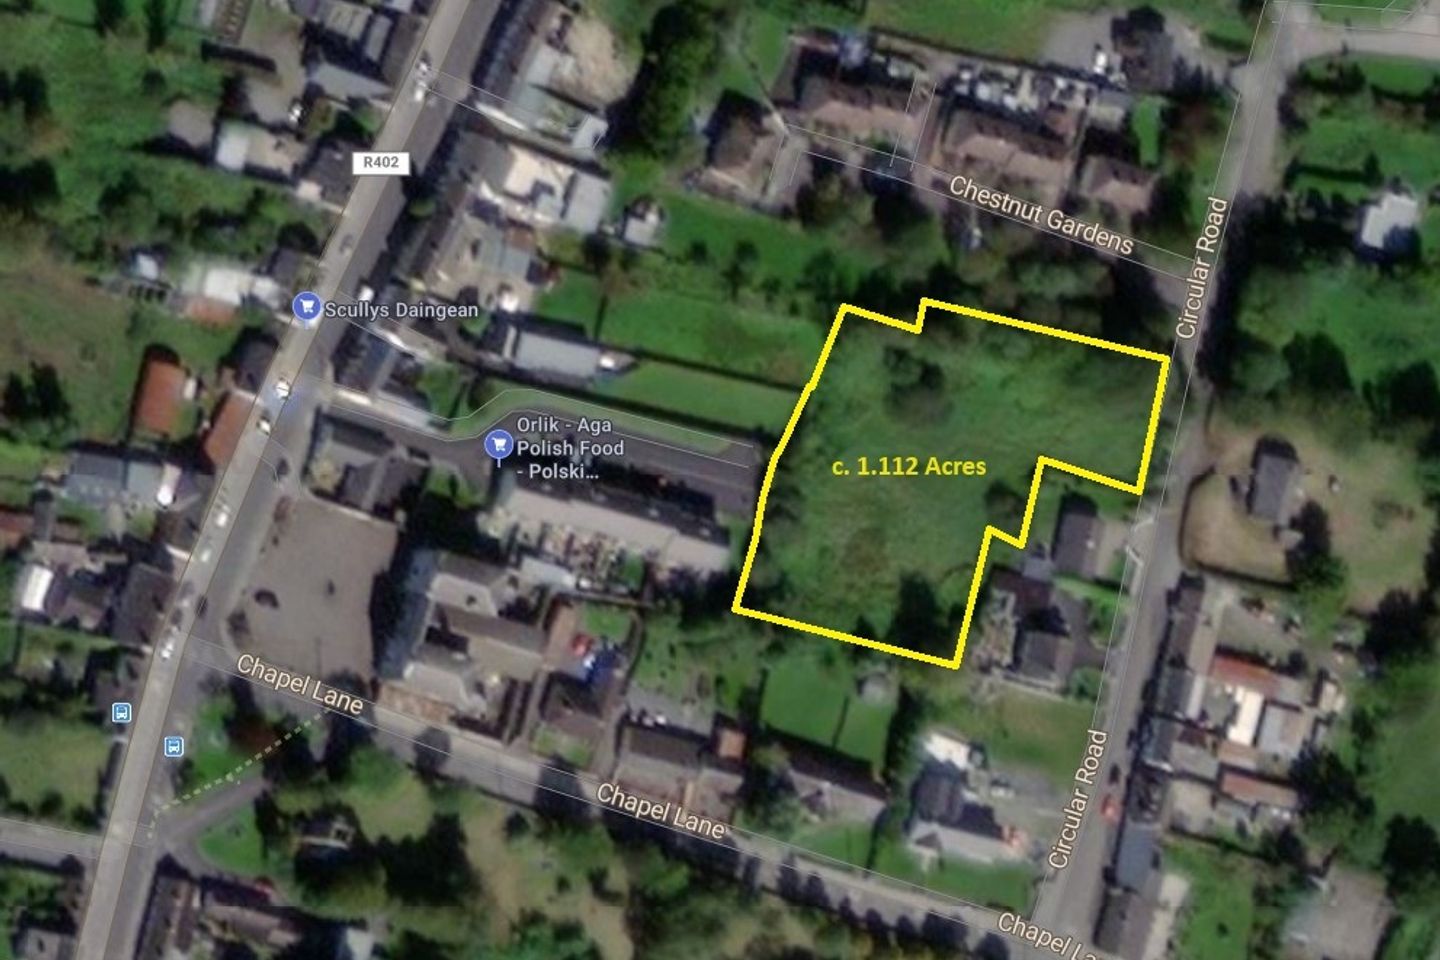 1.1 Acre Development site (Town Centre Mixed Use) Circular Road, Daingean, Co. Offaly